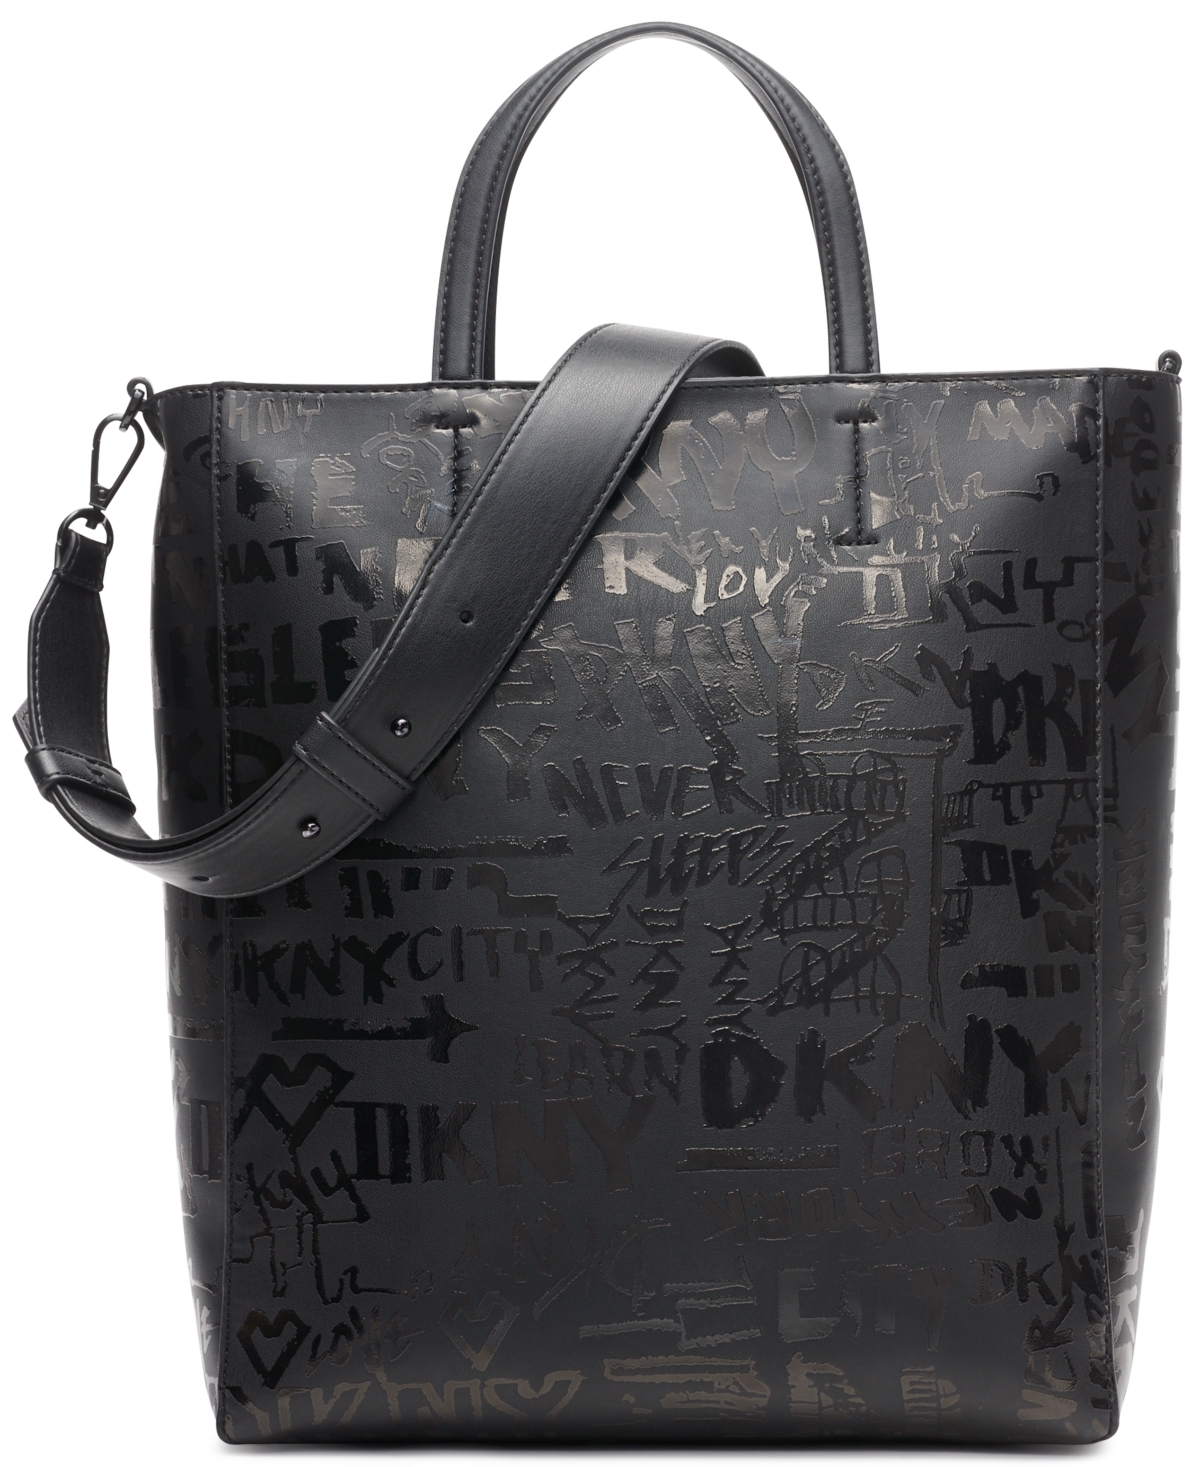 Dkny Tilly North South Tote